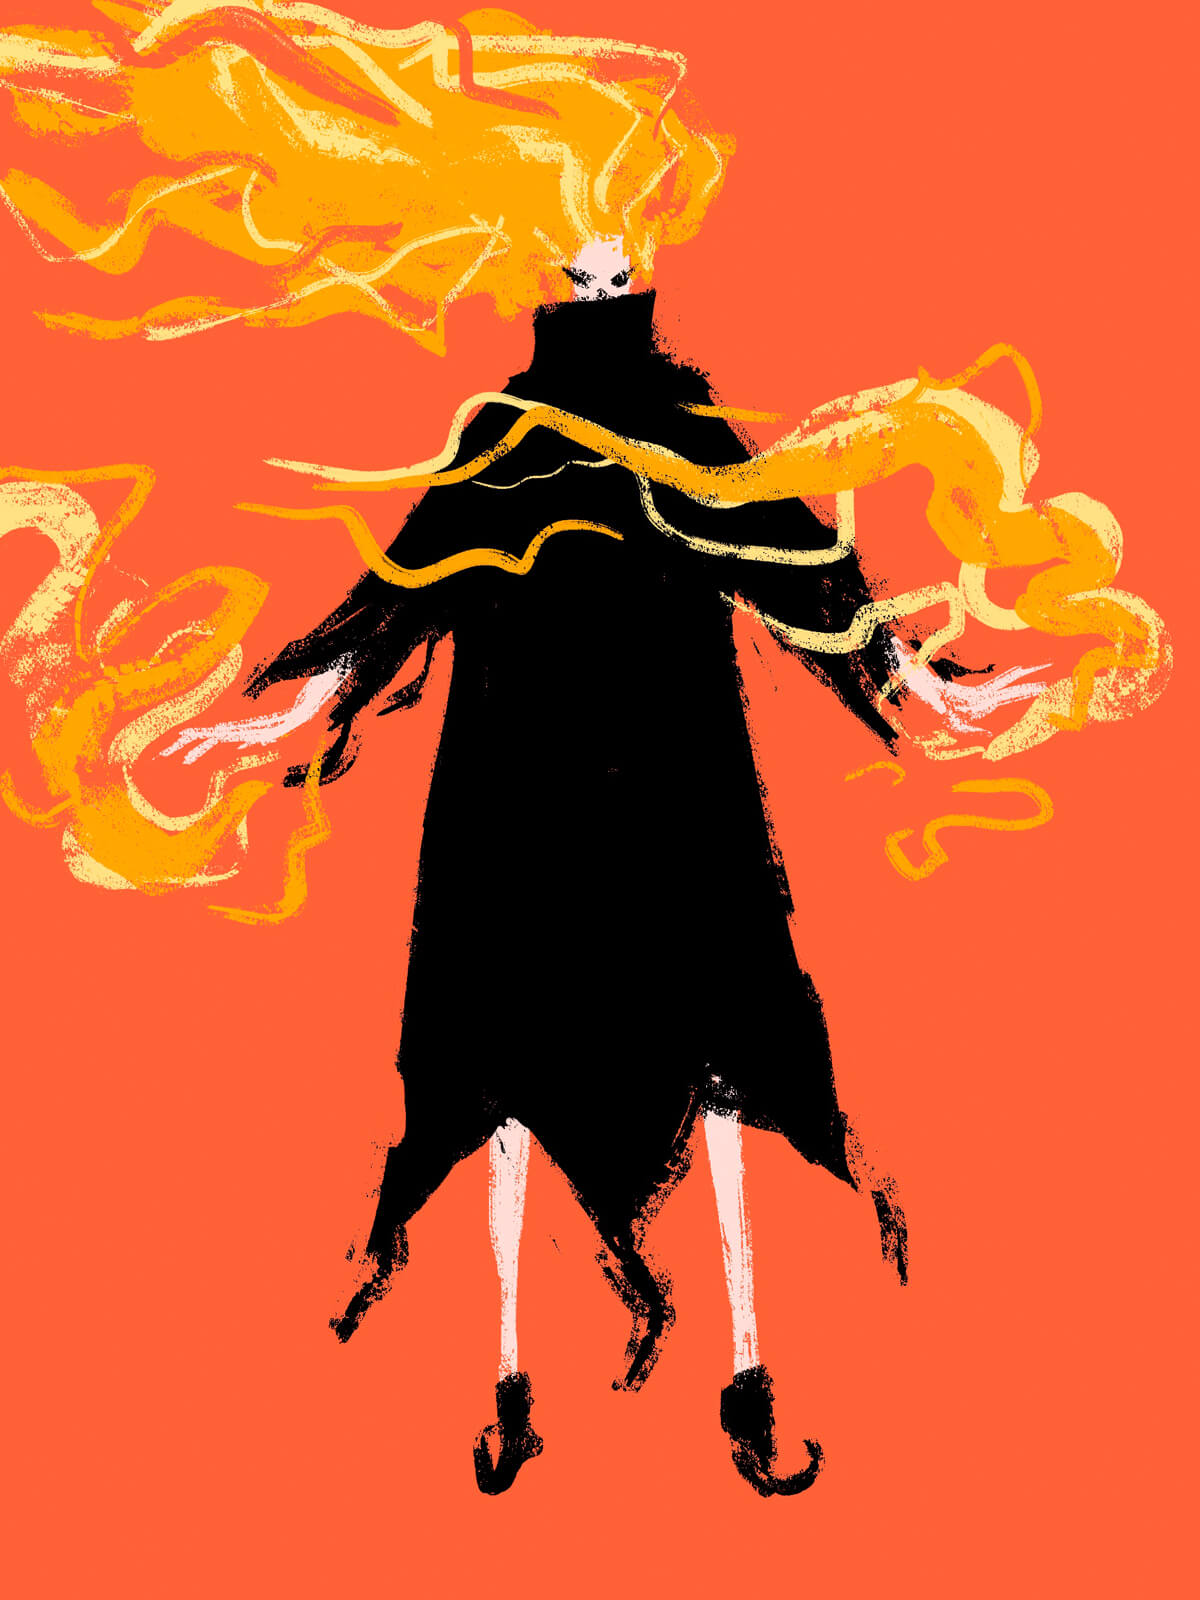 flame girl in full form, flames coming from her hands and head, digital